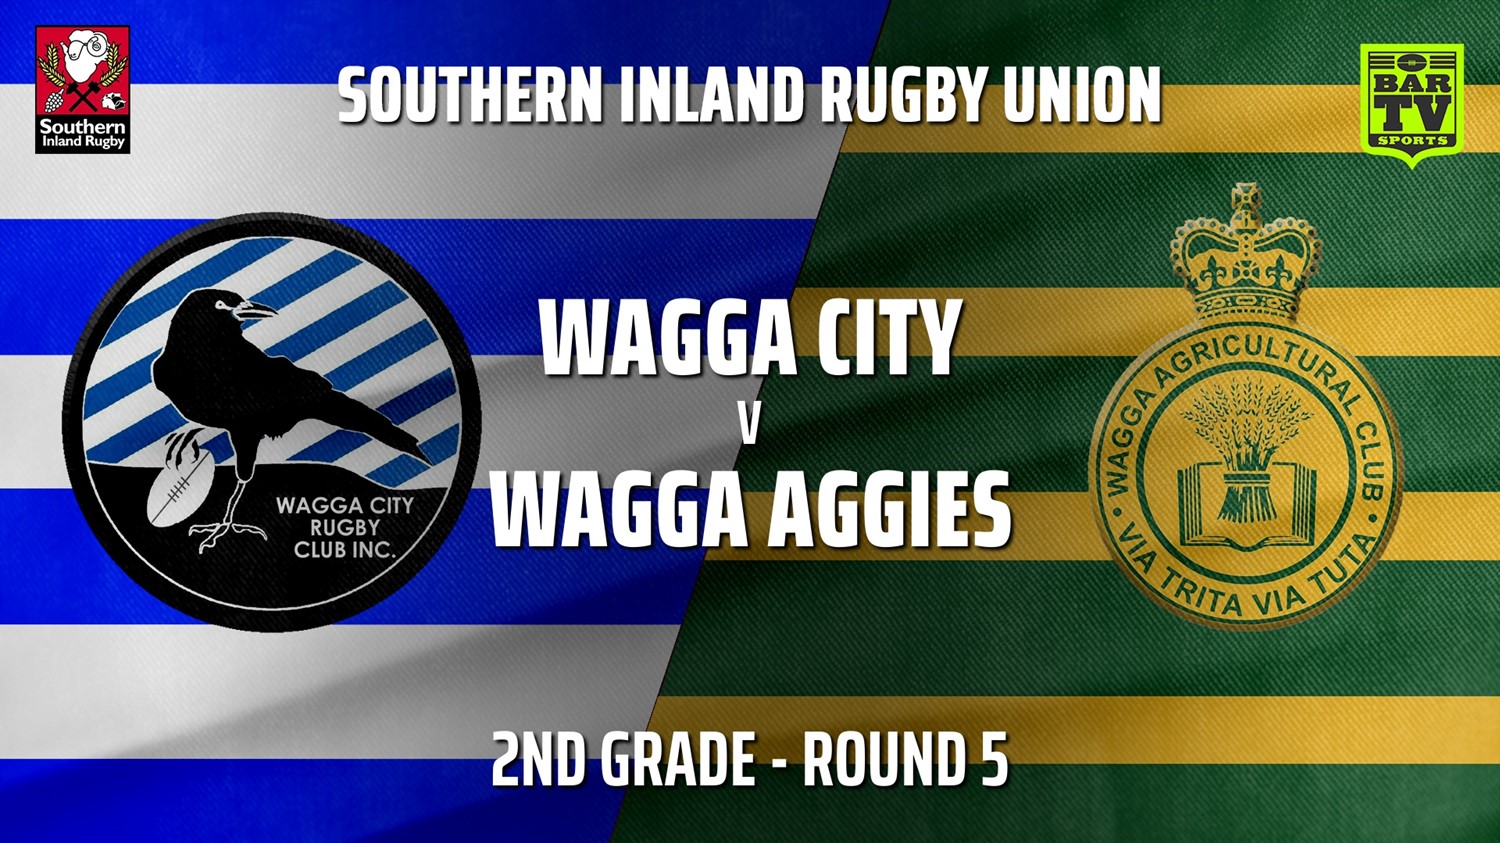 210508-Southern Inland Rugby Union Round 5 - 2nd Grade - Wagga City v Wagga Agricultural College Minigame Slate Image